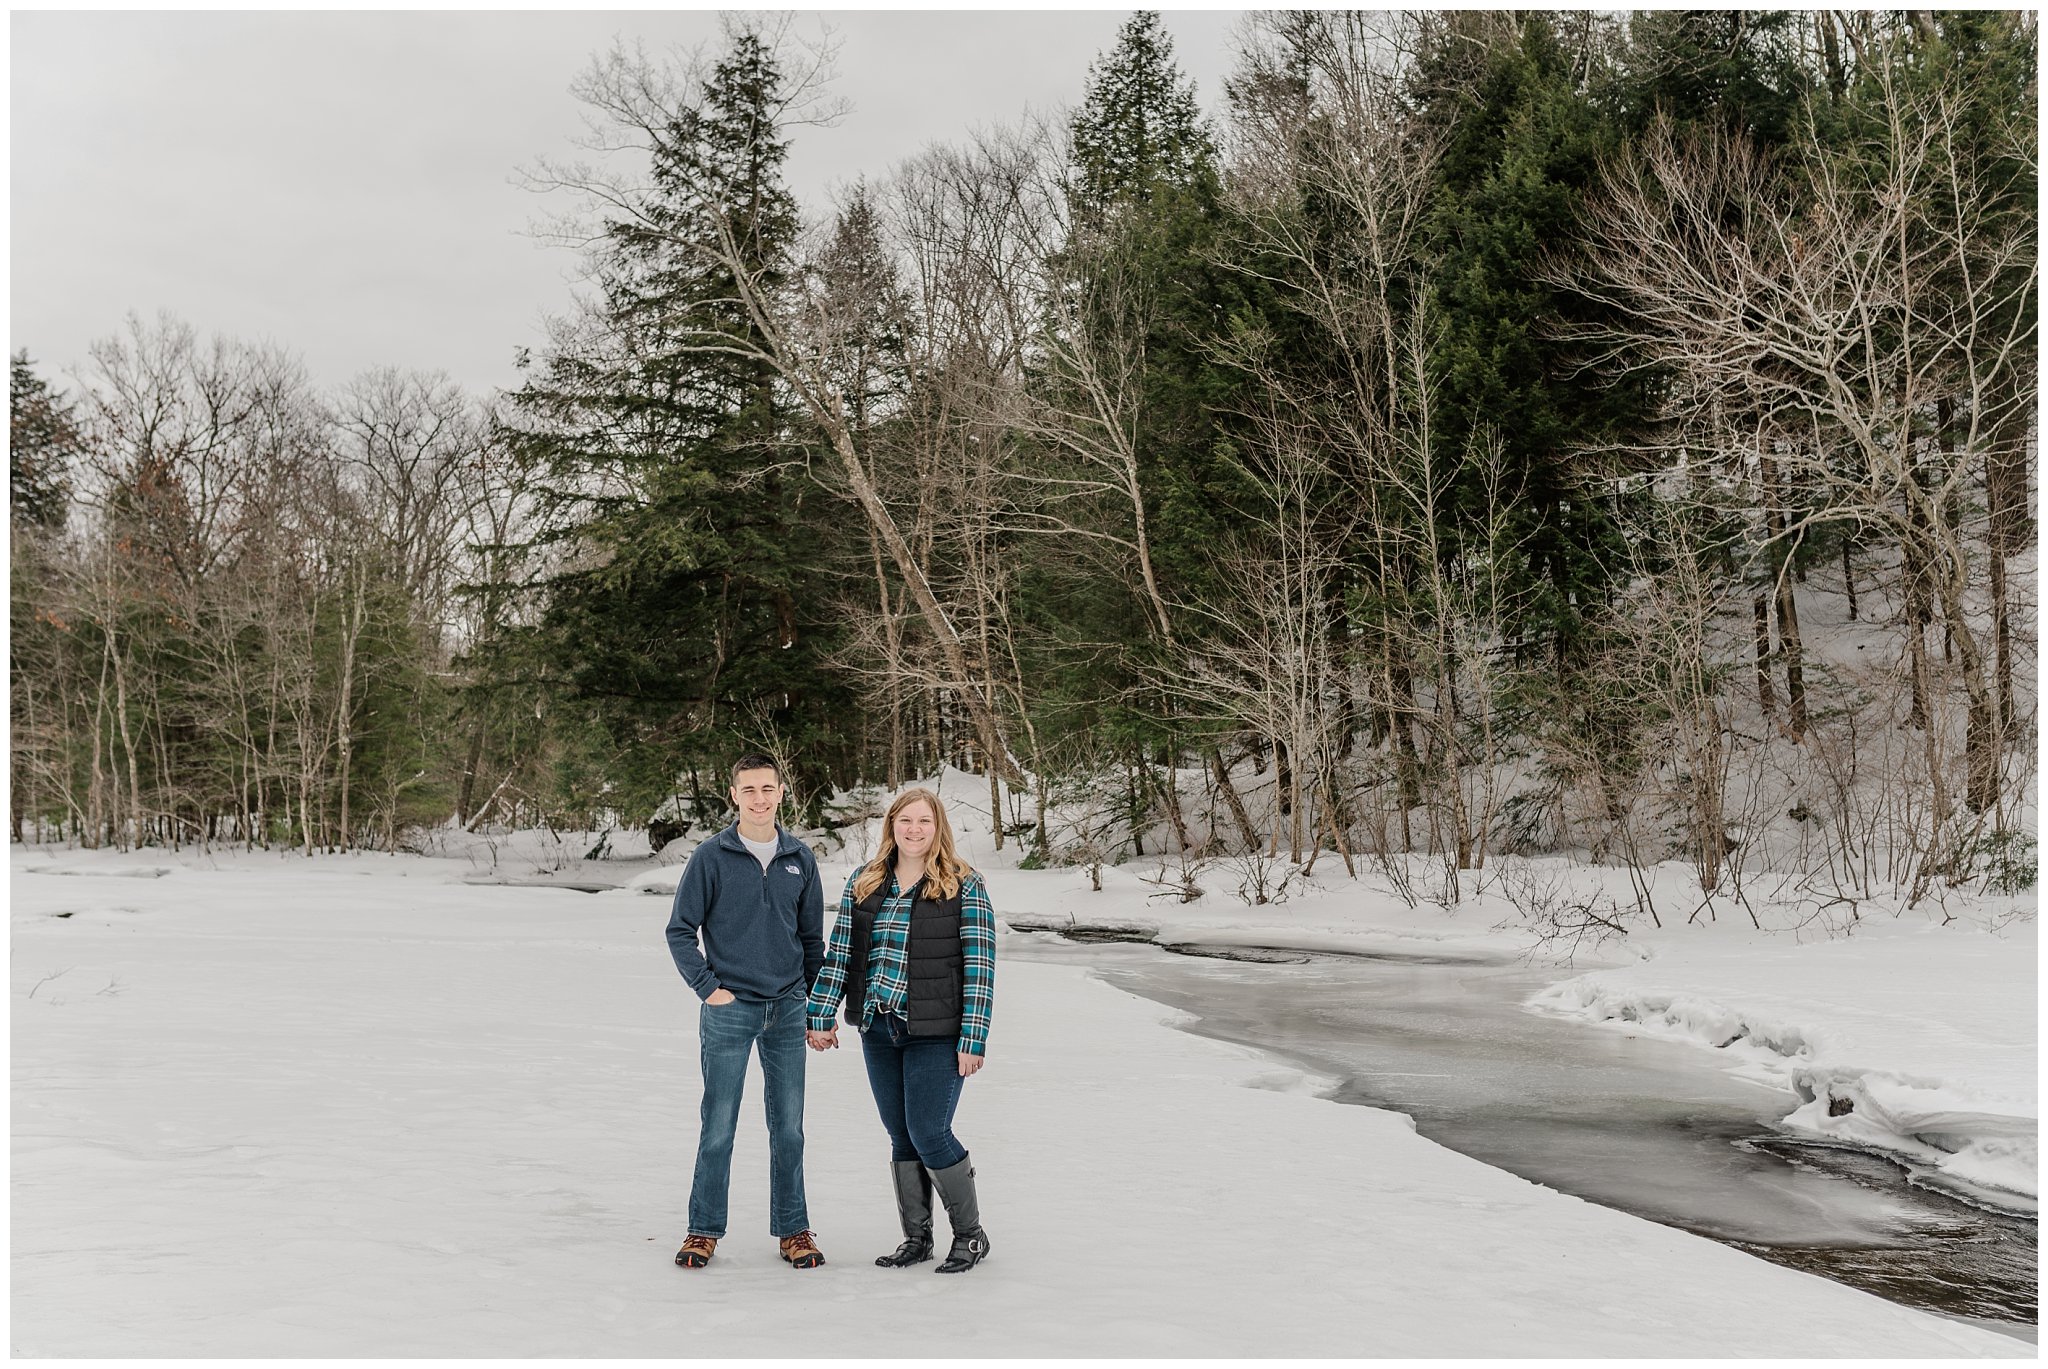 Engagement Session Ideas,Joanna Young Photography,Salmon River Ralls,Waterfall Engagement Photos,Wedding Photographer,Winter Engagement Session,